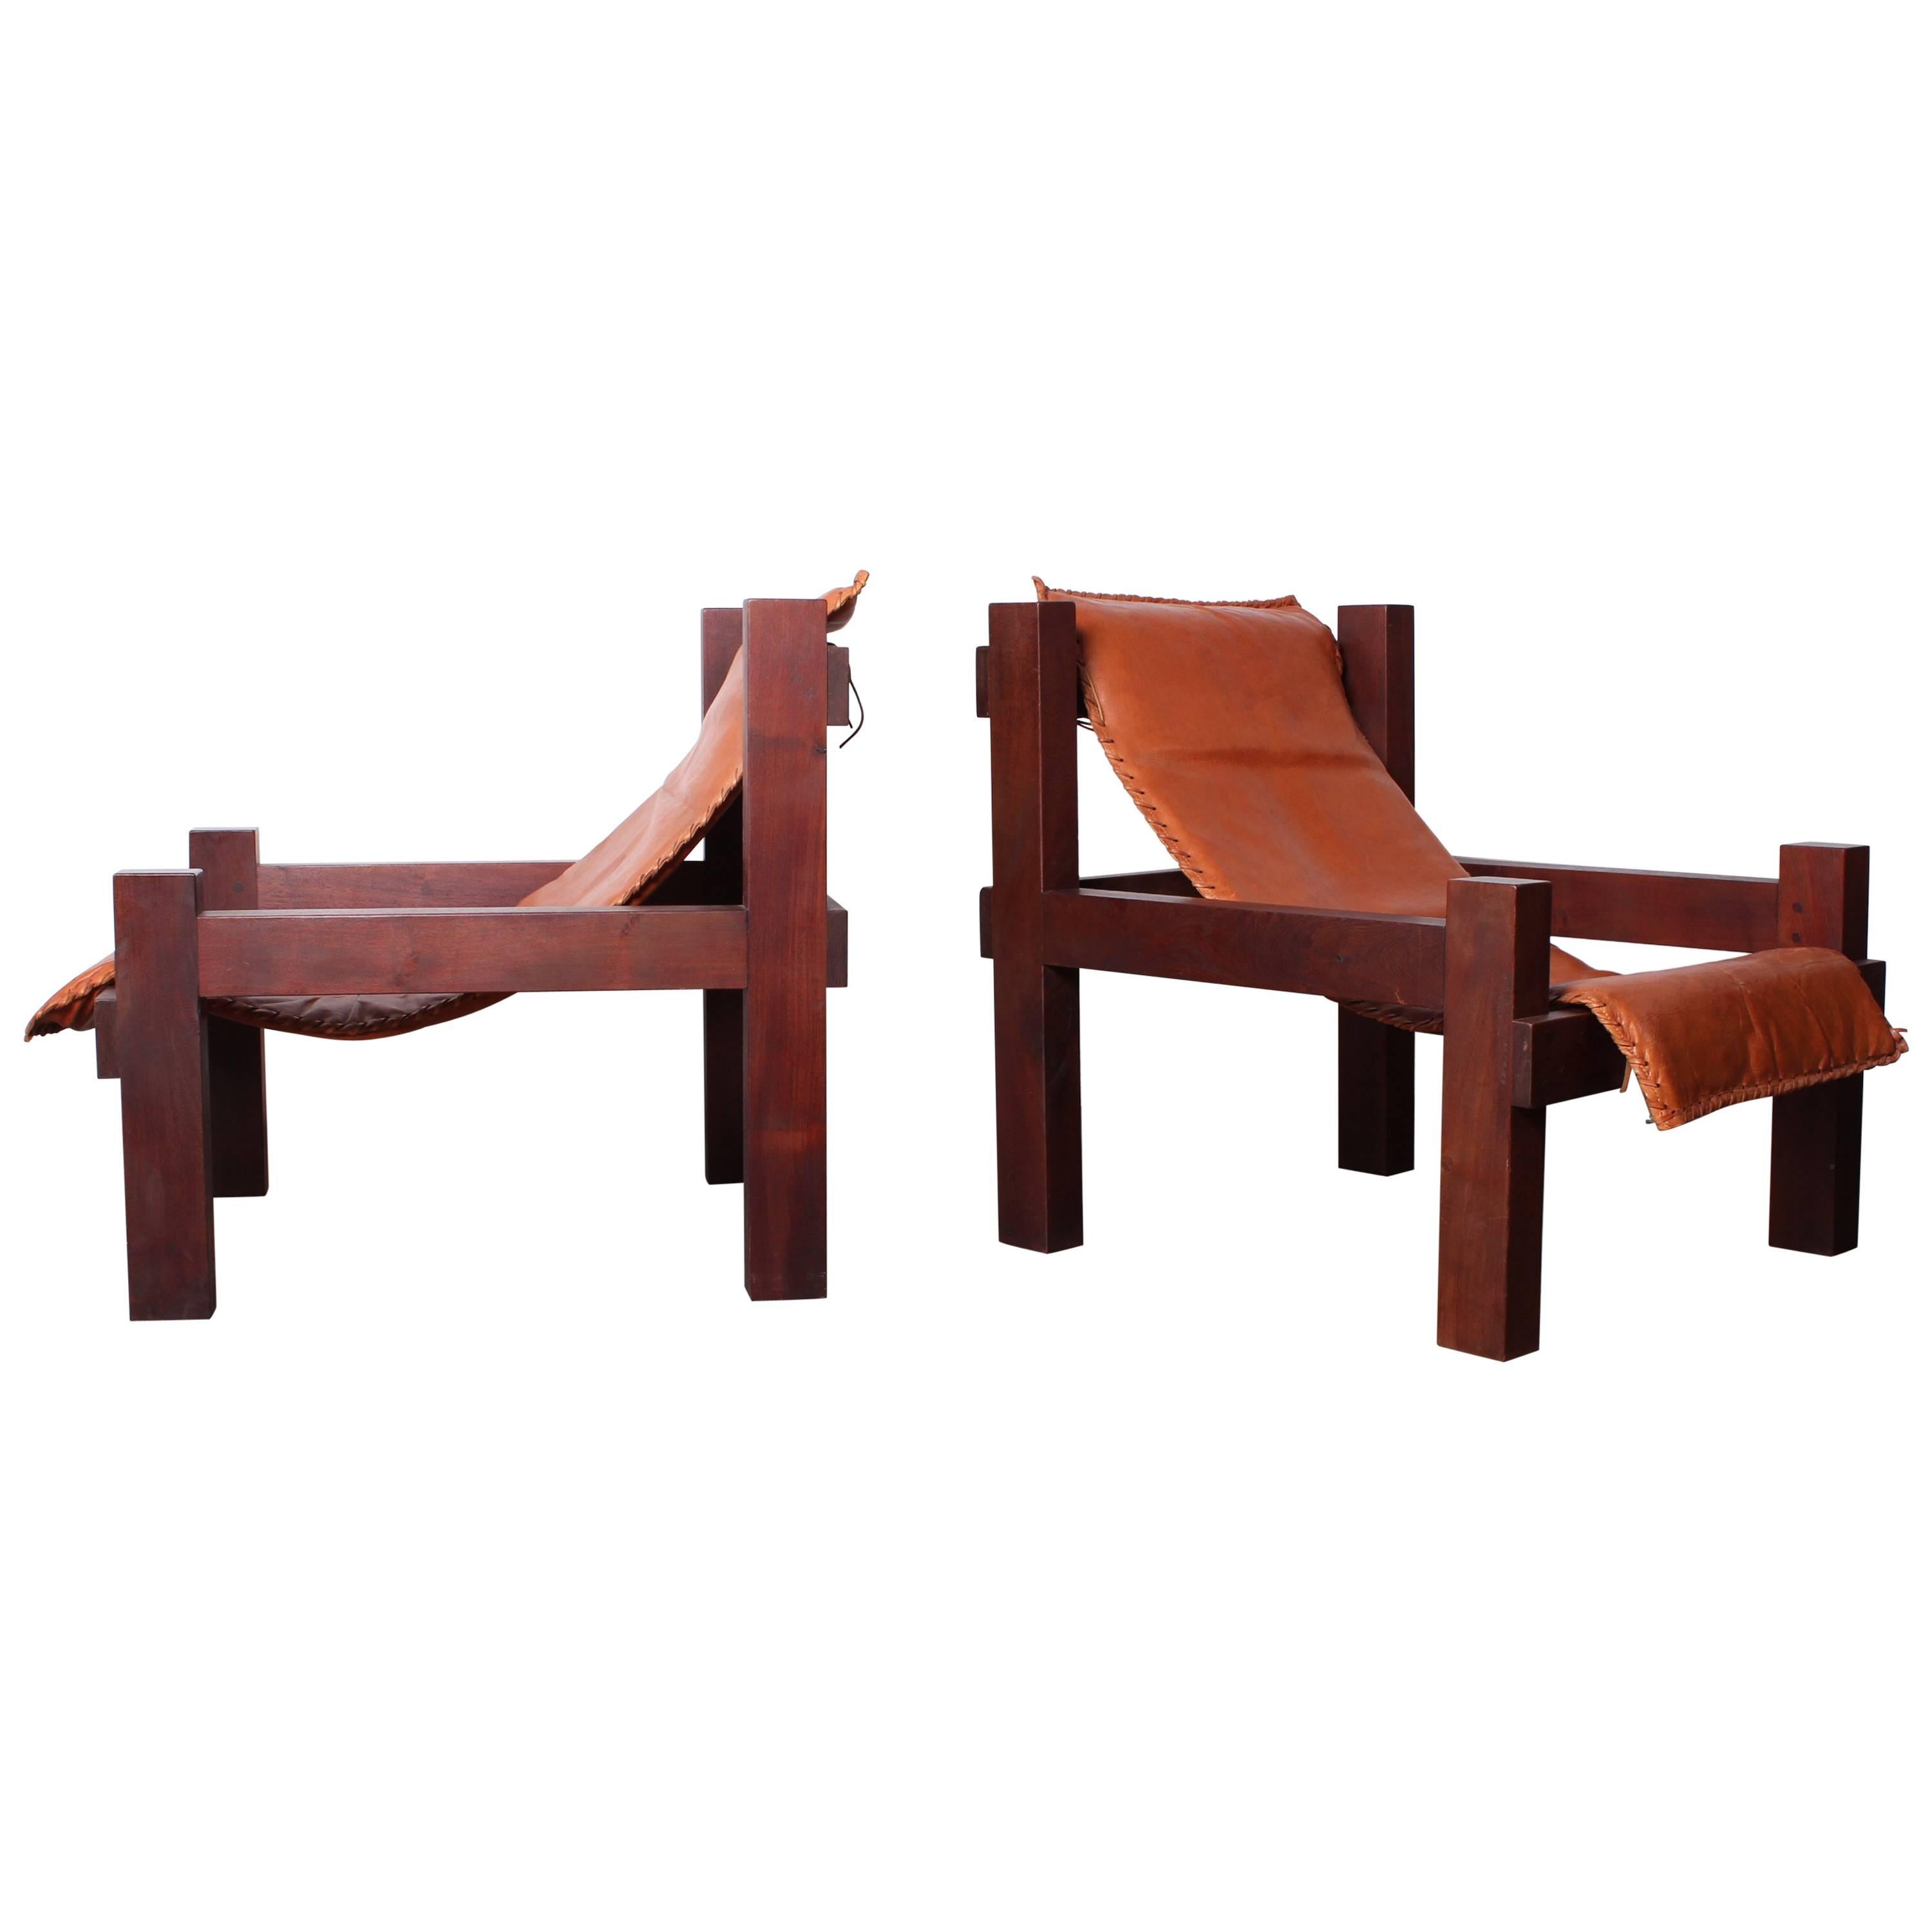 Pair of Large Leather Sling Chairs